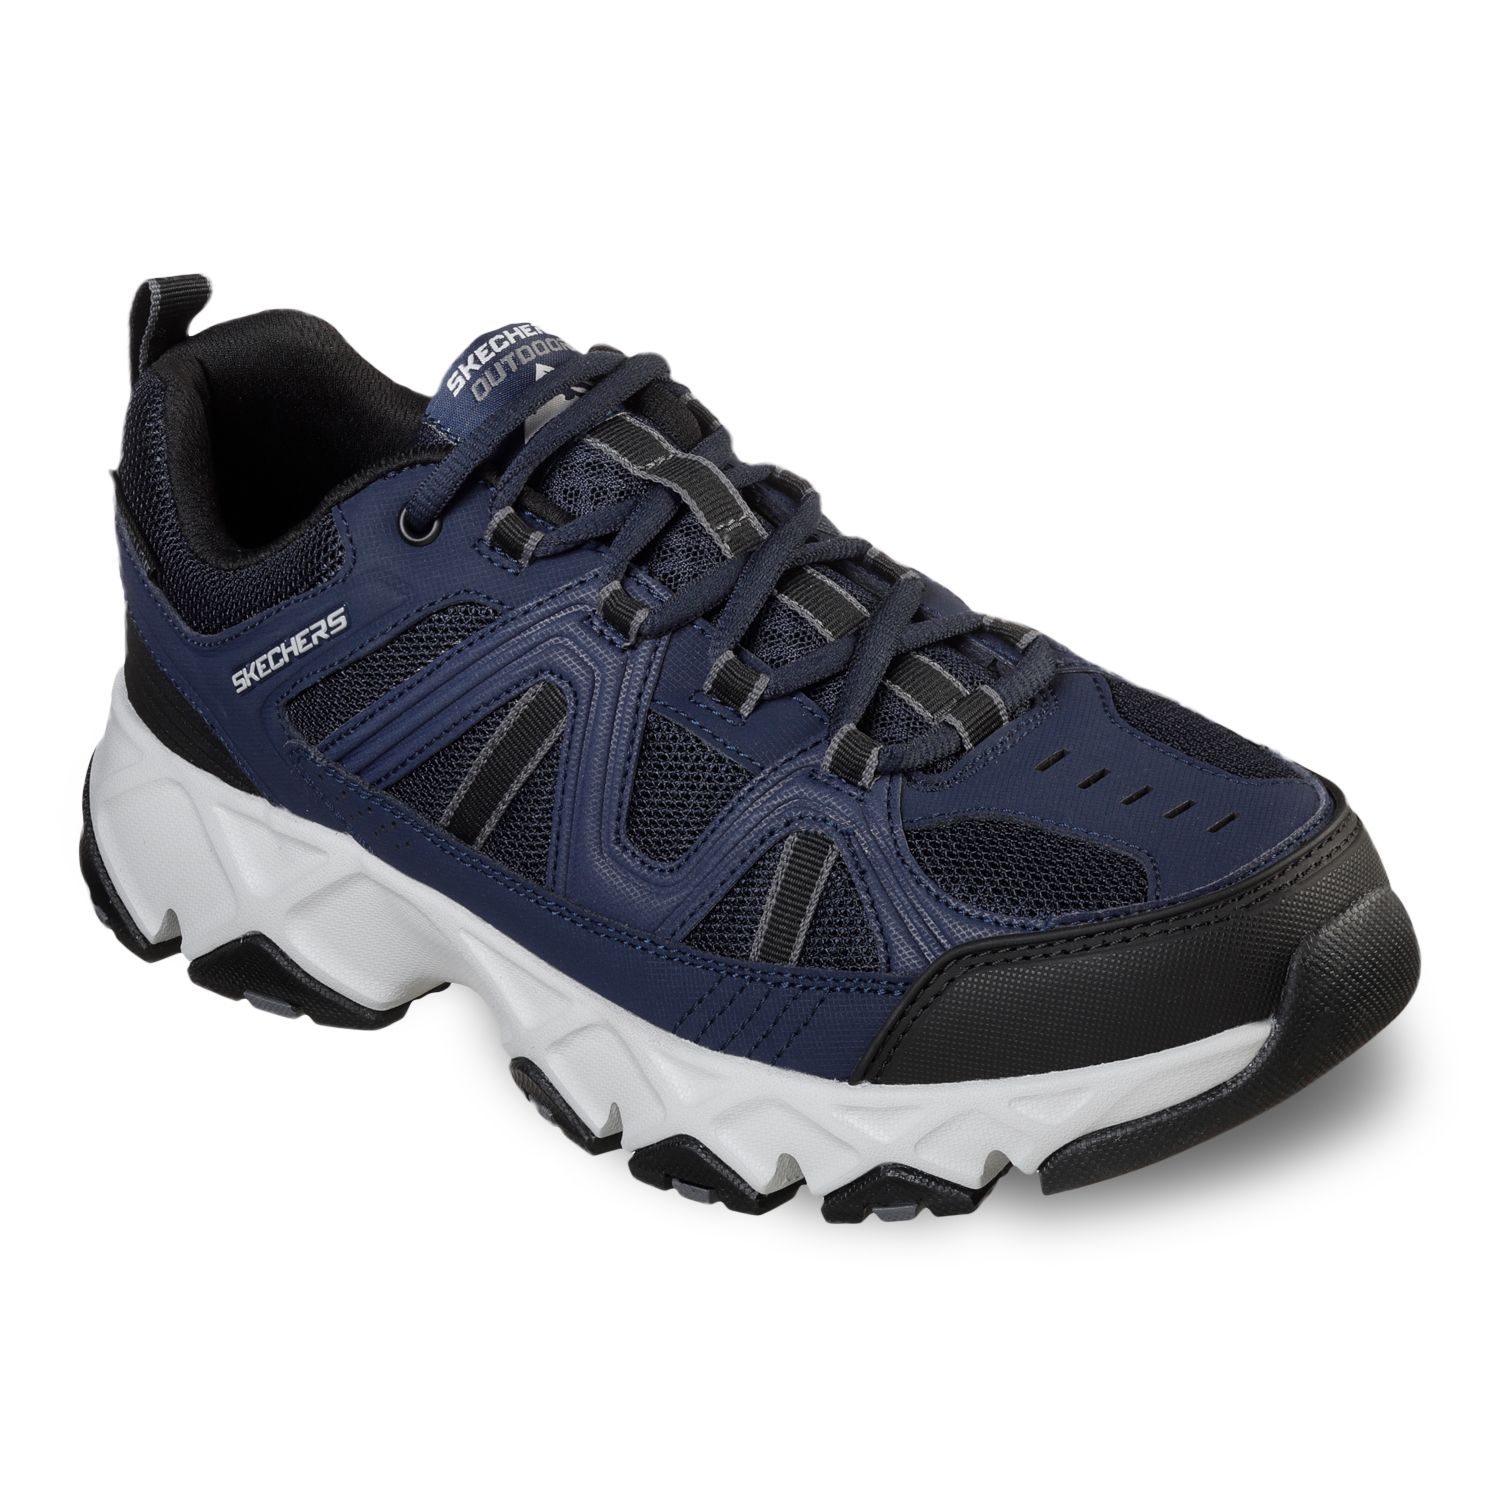 skechers mens sneakers relaxed fit